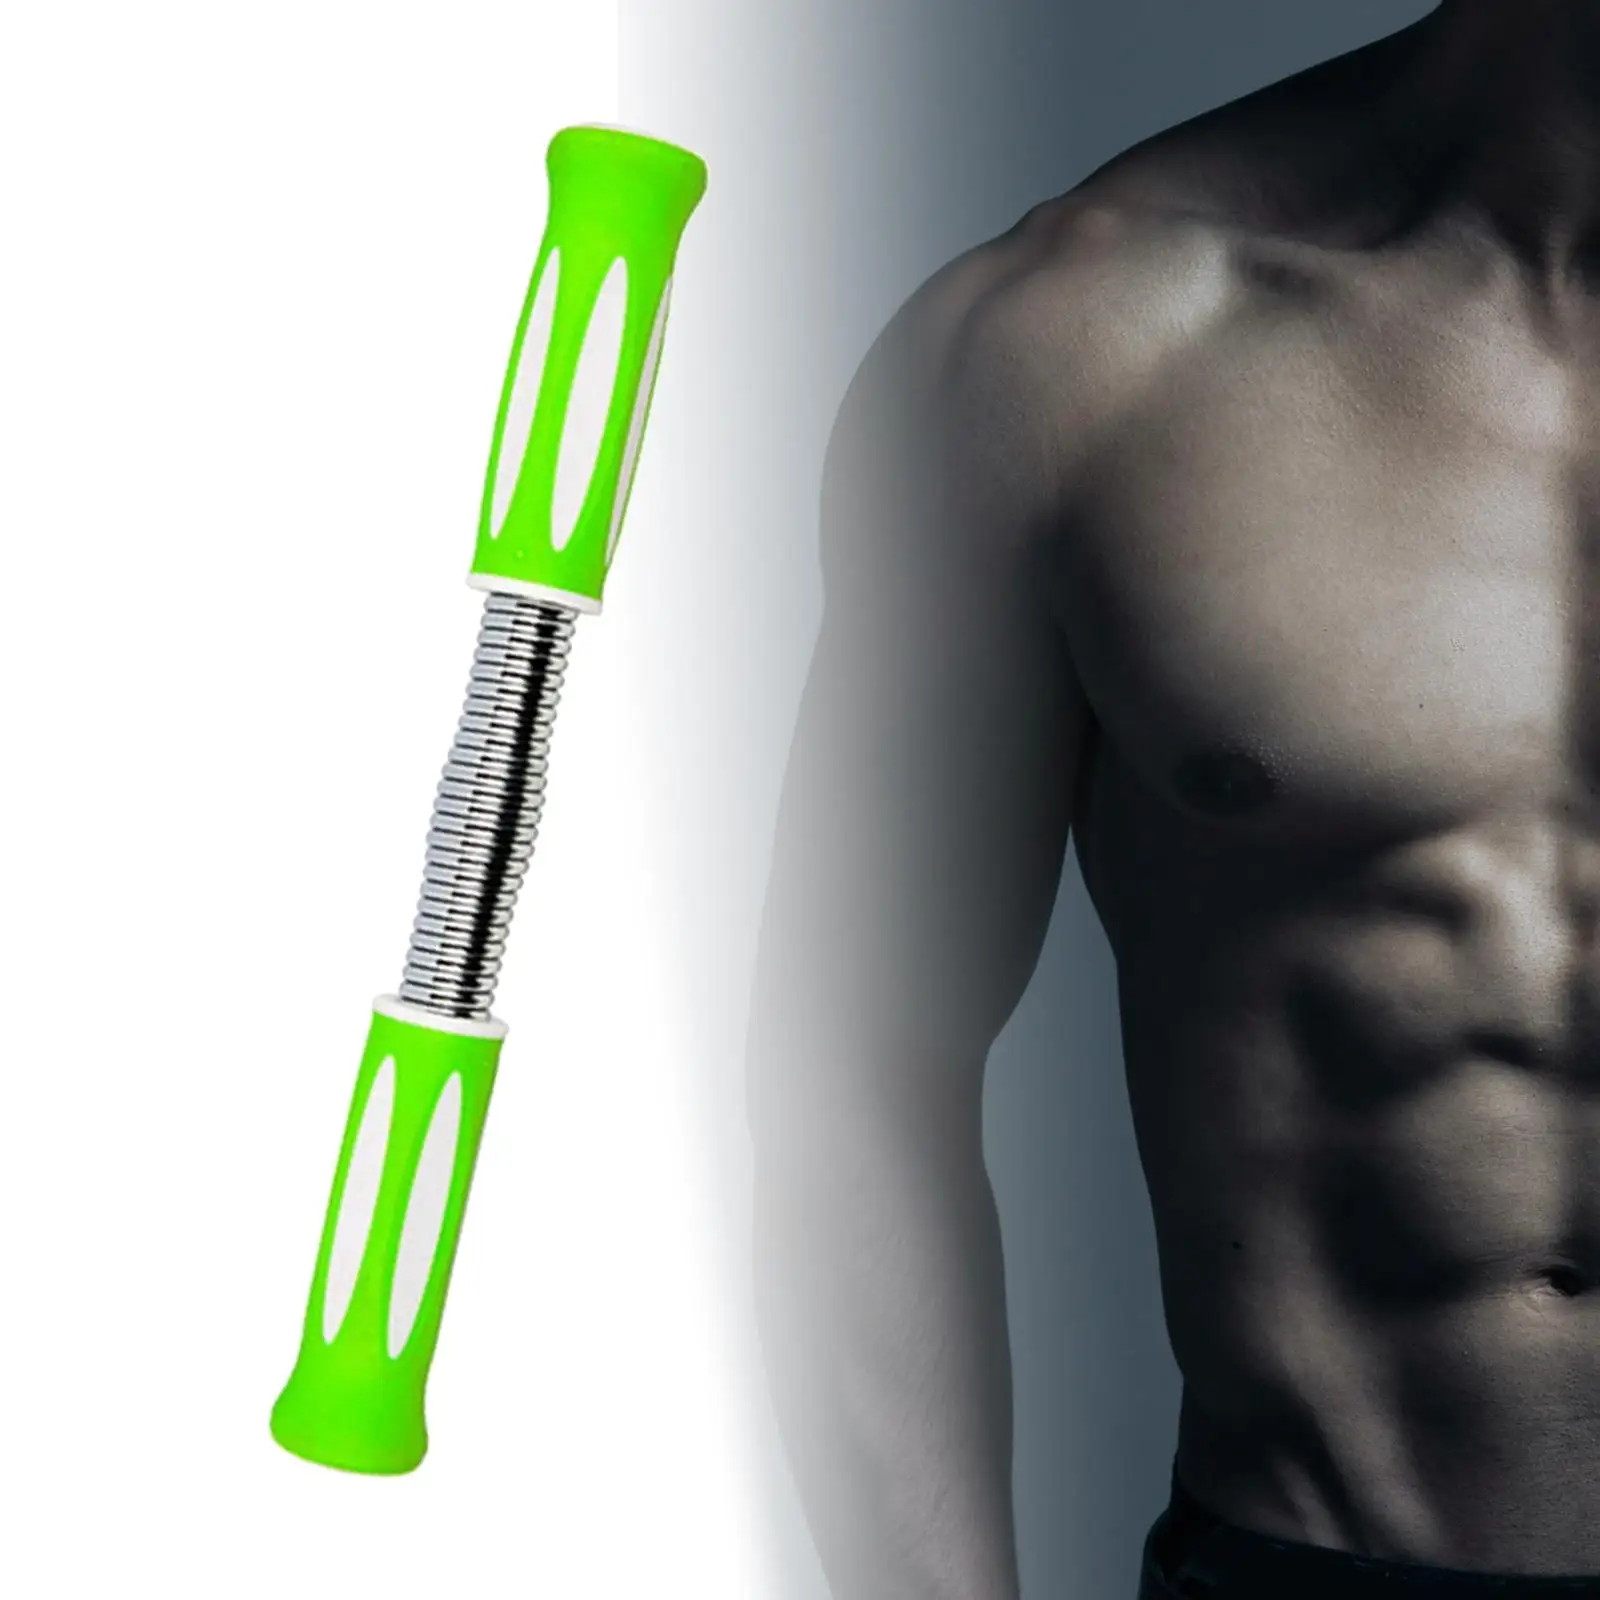 Spring Power Twister Bar Workout Equipment Fitness Chest Expander Upper Body Exercise for Muscle Training Trainer Bicep Shoulder